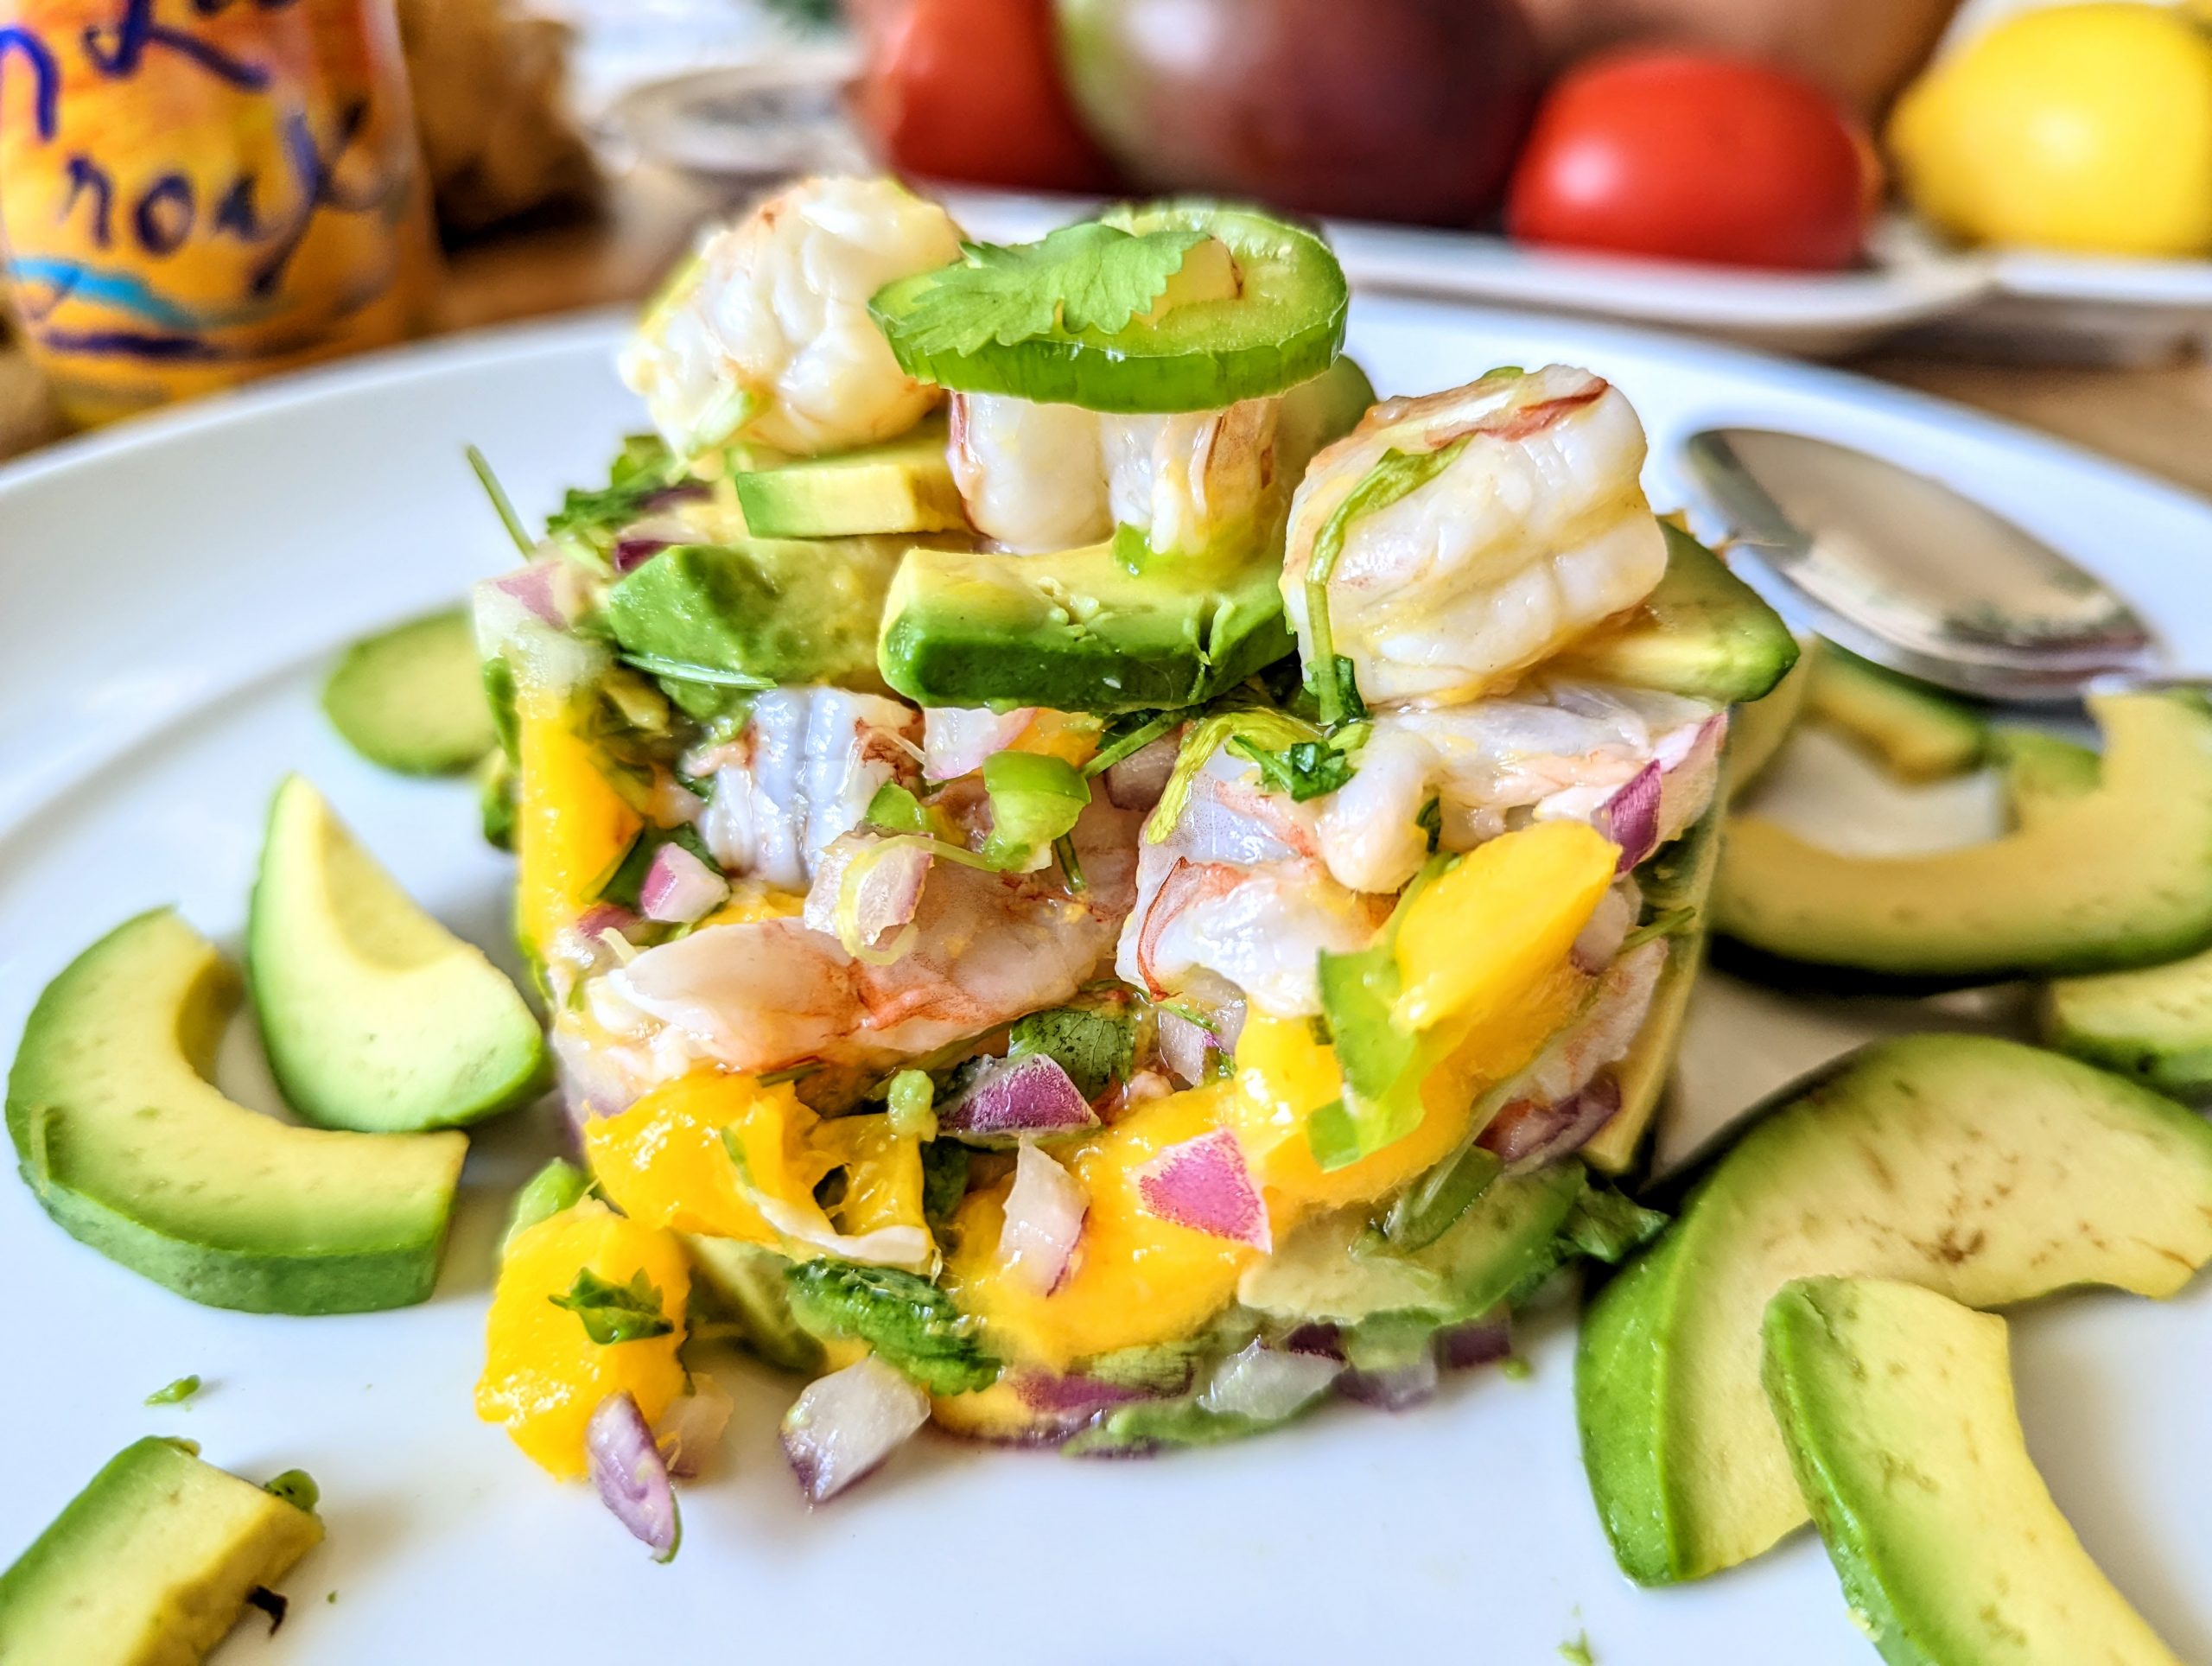 A tower of shrimp ceviche that's been cut into. Pieces of plump shrimp, mango, avocado, cilantro, and jalapeño are visible.